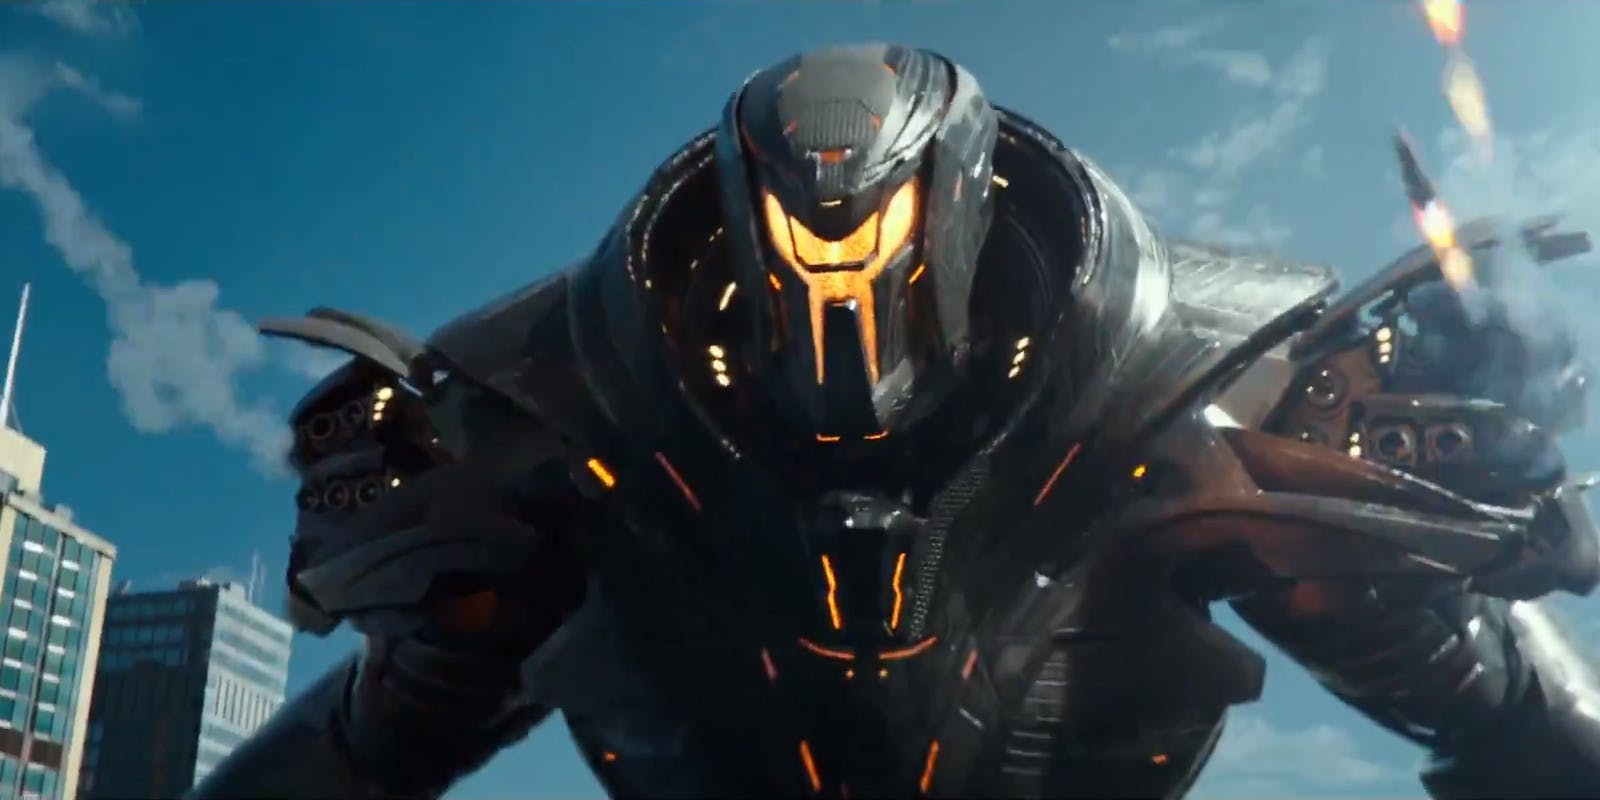 Jaegers and Kaiju rise again in Pacific Rim Uprising. News & Features